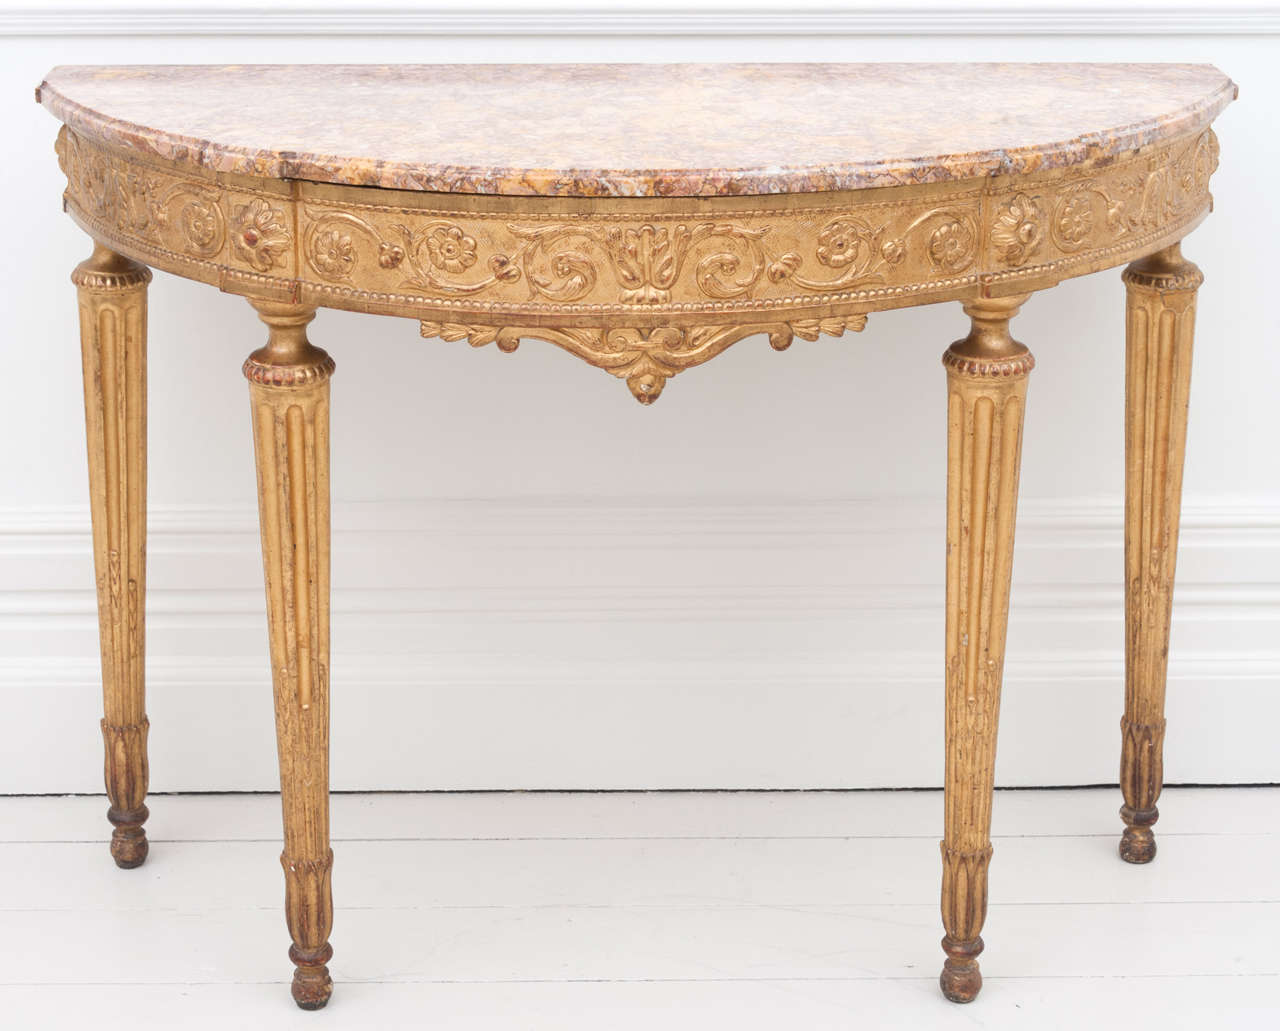 A very fine and impressive 18th c. Italian demi-lune table with original Spanish brocatelle marble top. The colour and condition of the gilding and table is excellent.